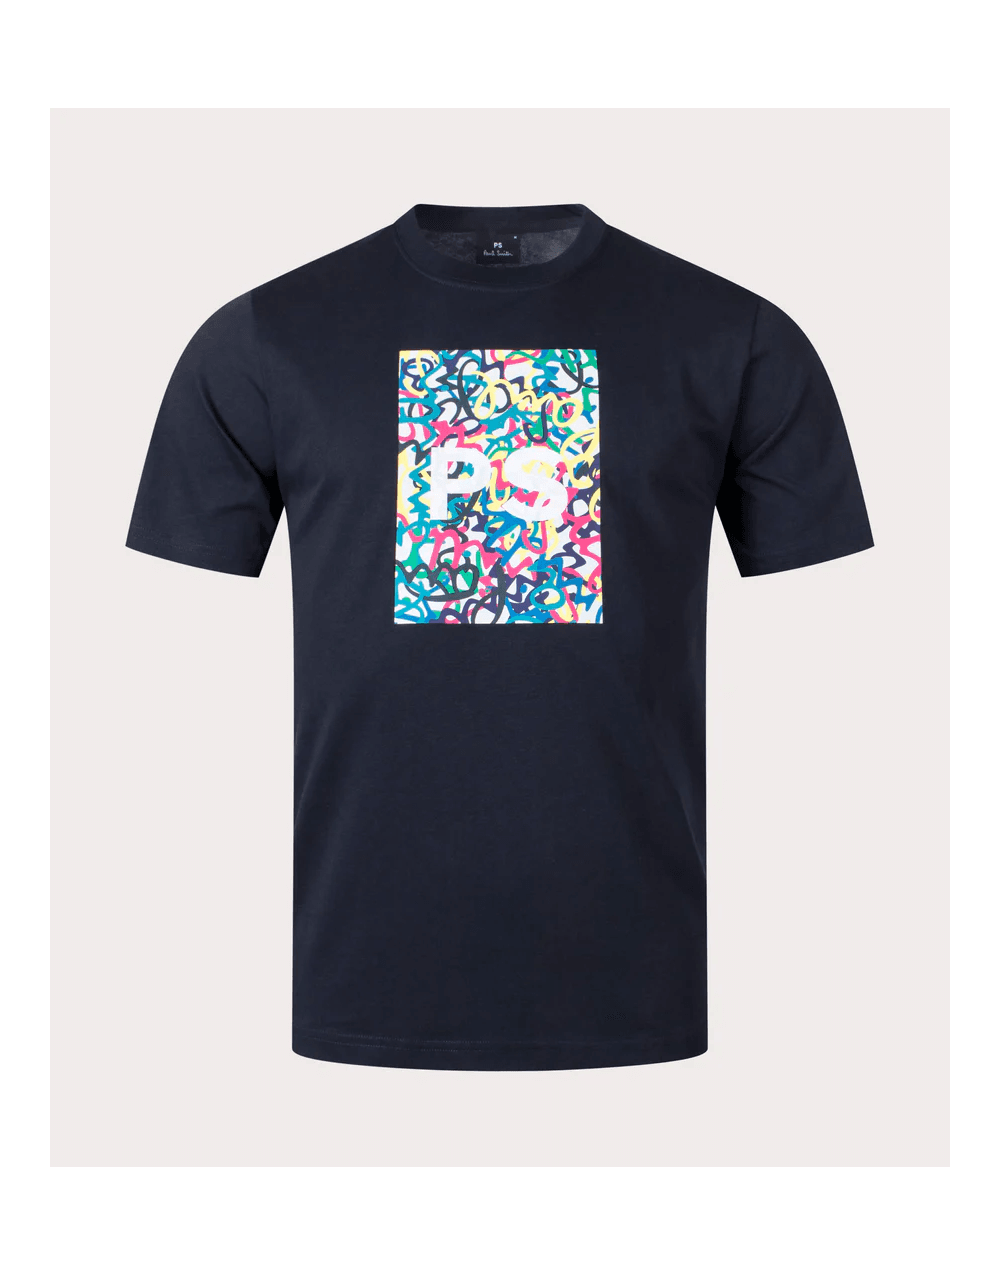 Paul Smith Navy PS Logo Graphic T Shirt